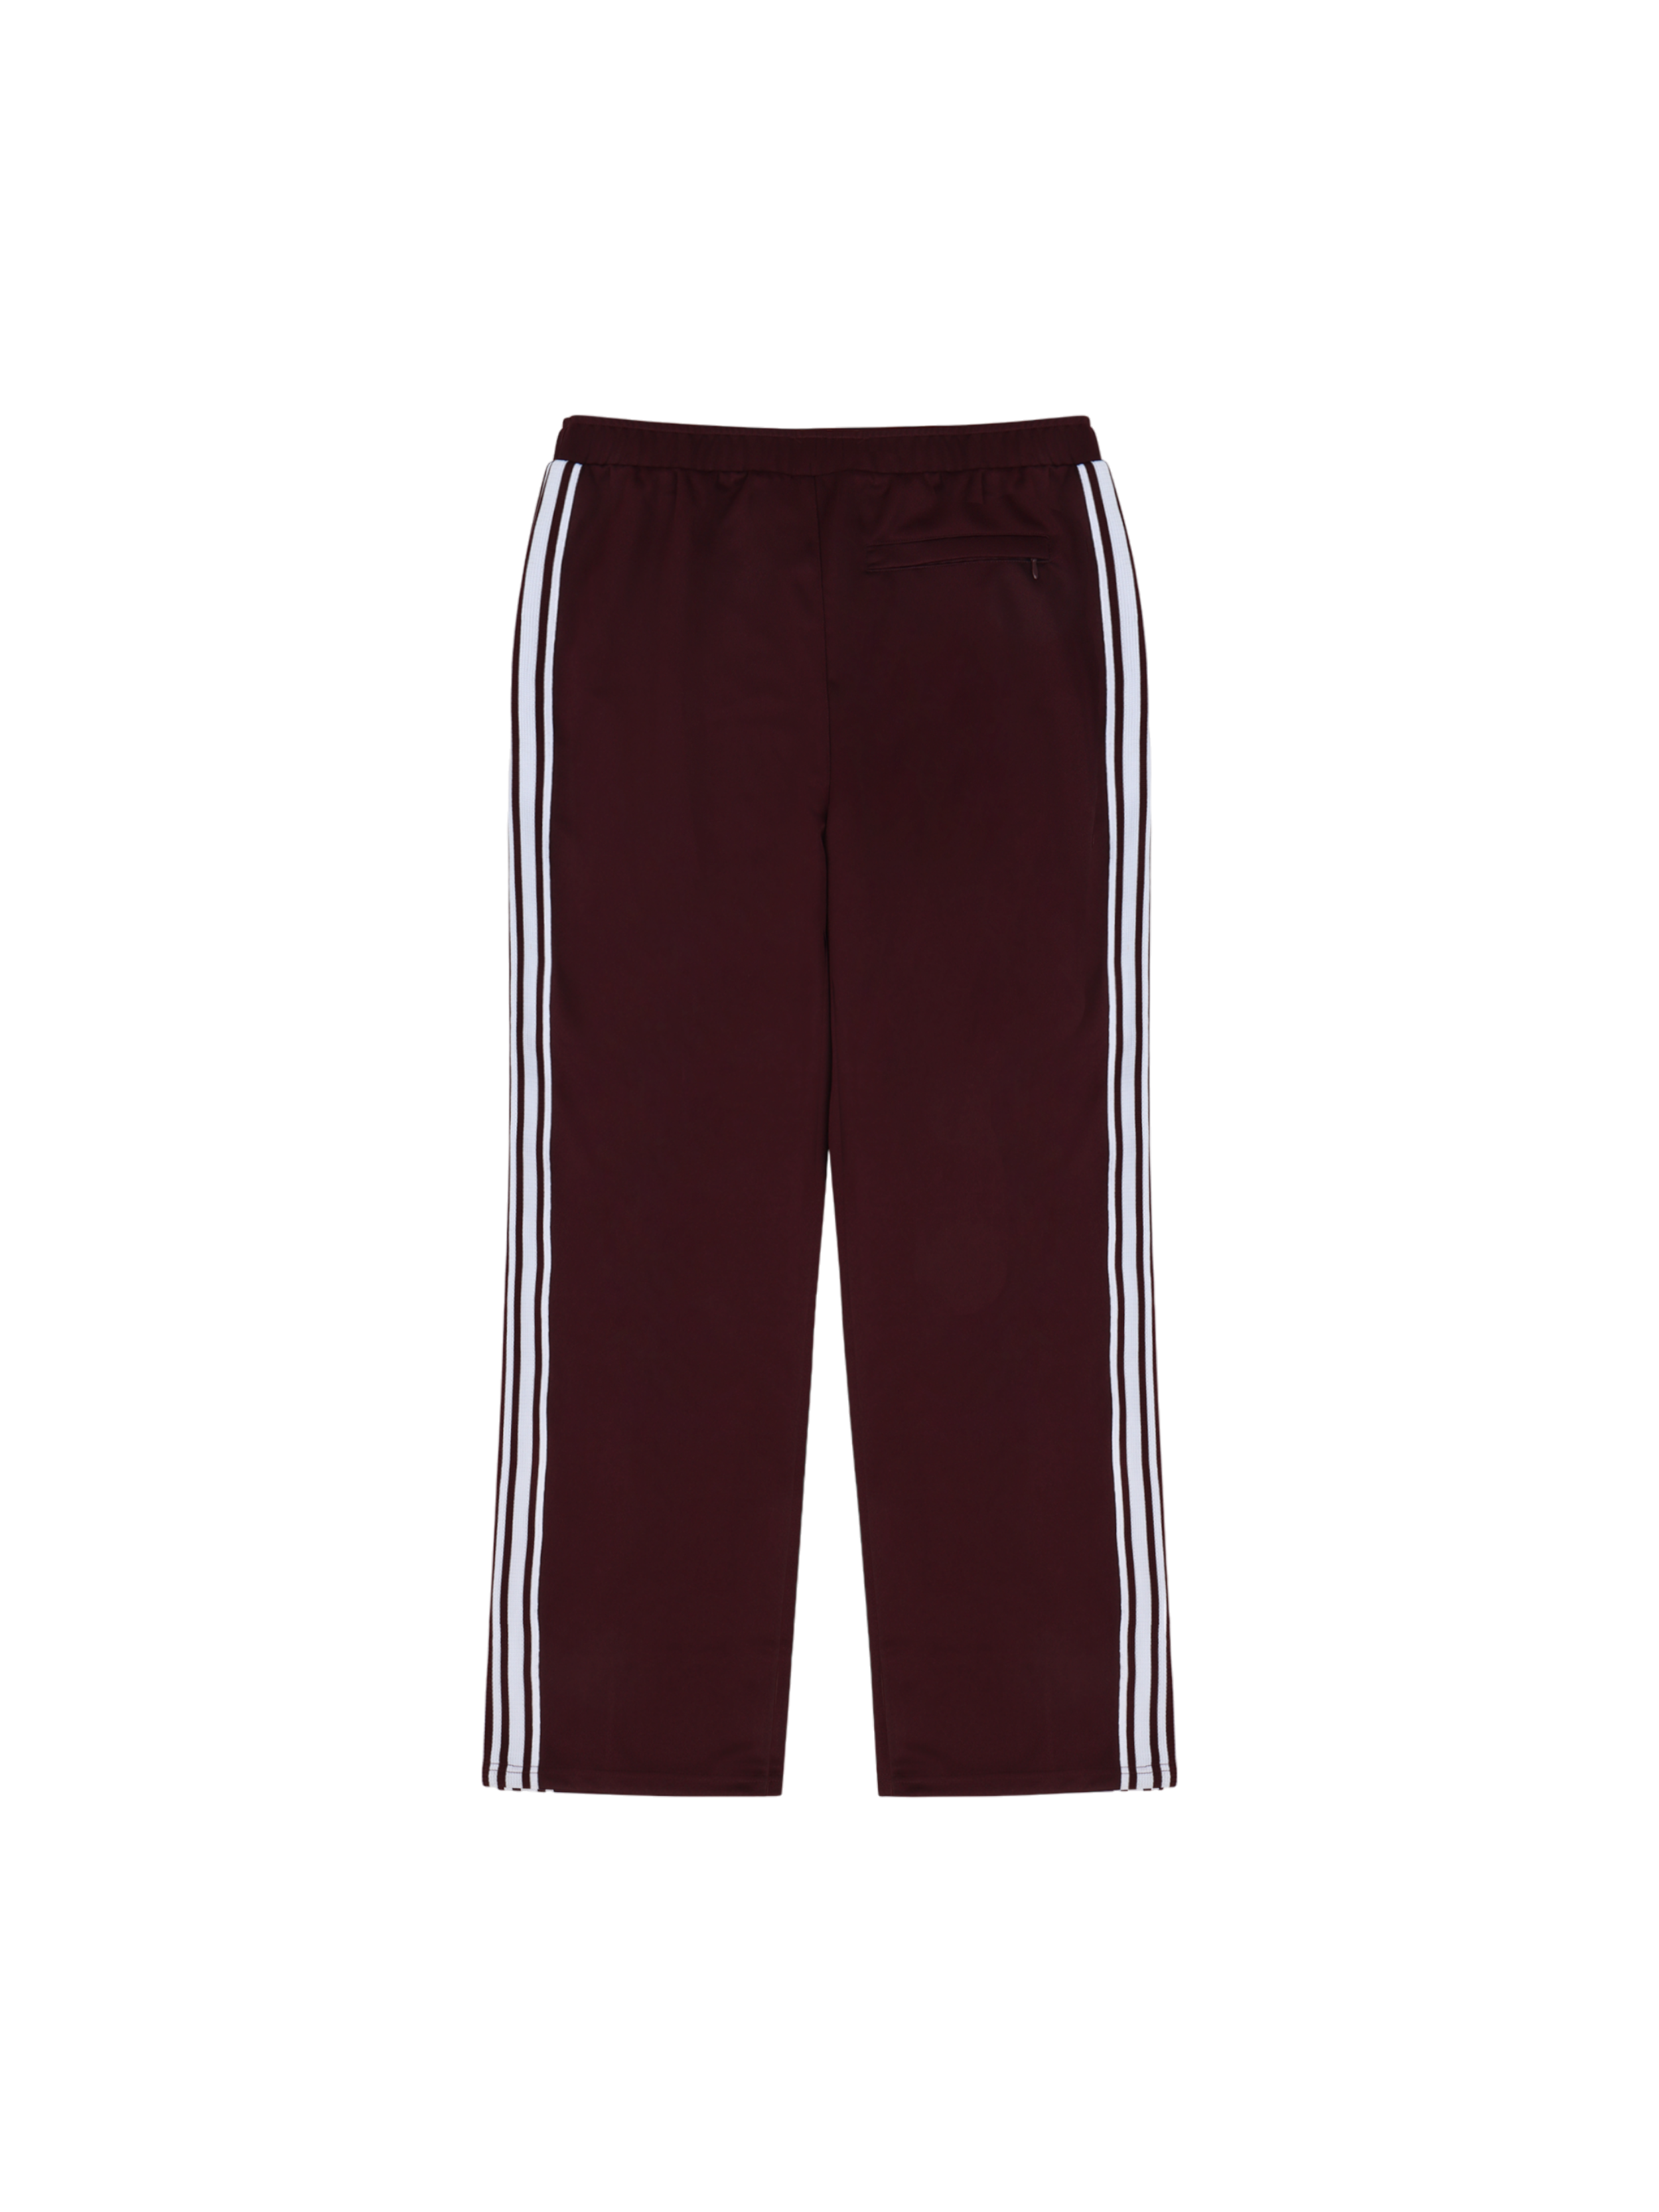 Classic Polo Men's Bottom Polyester Maroon Slim Fit Active Wear Track